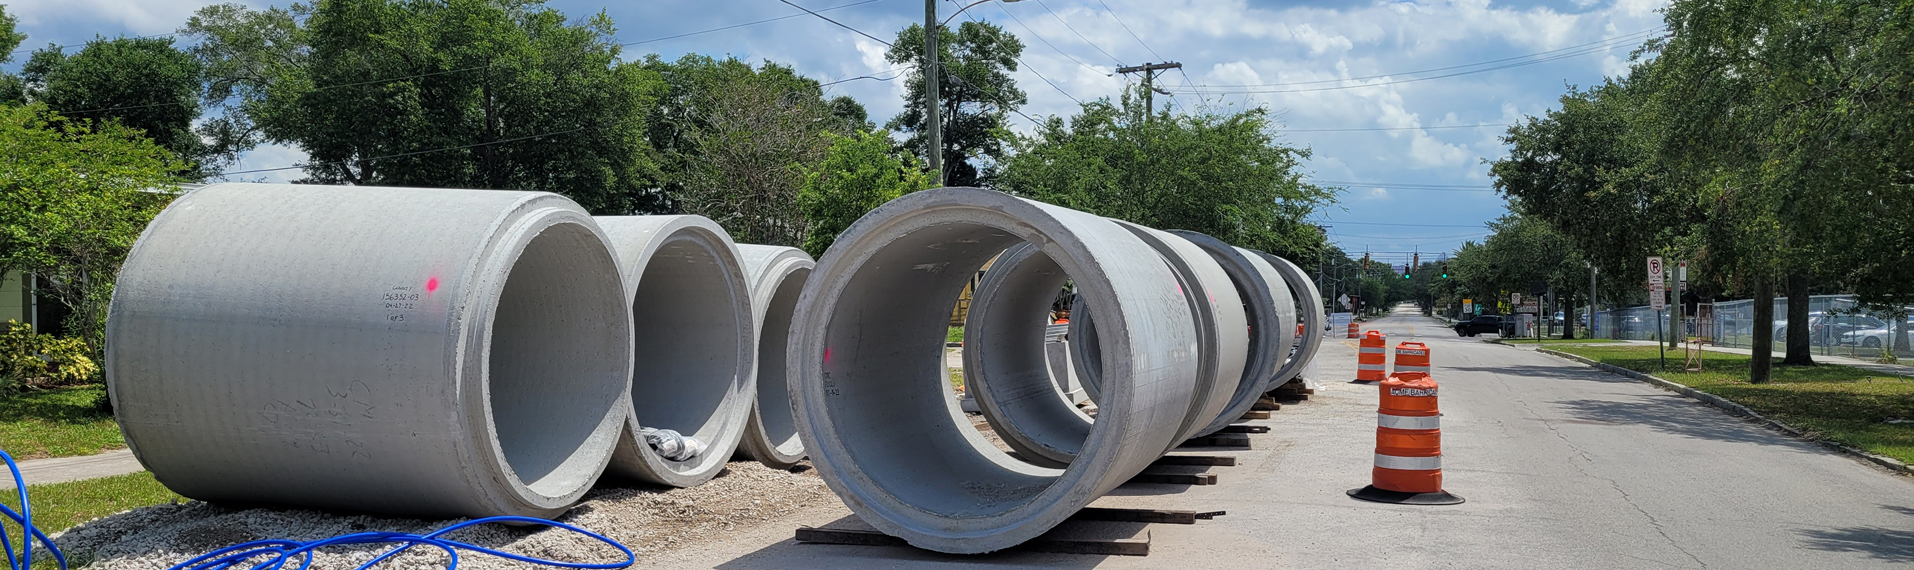 72-inch RCP pipe along Central Avenue